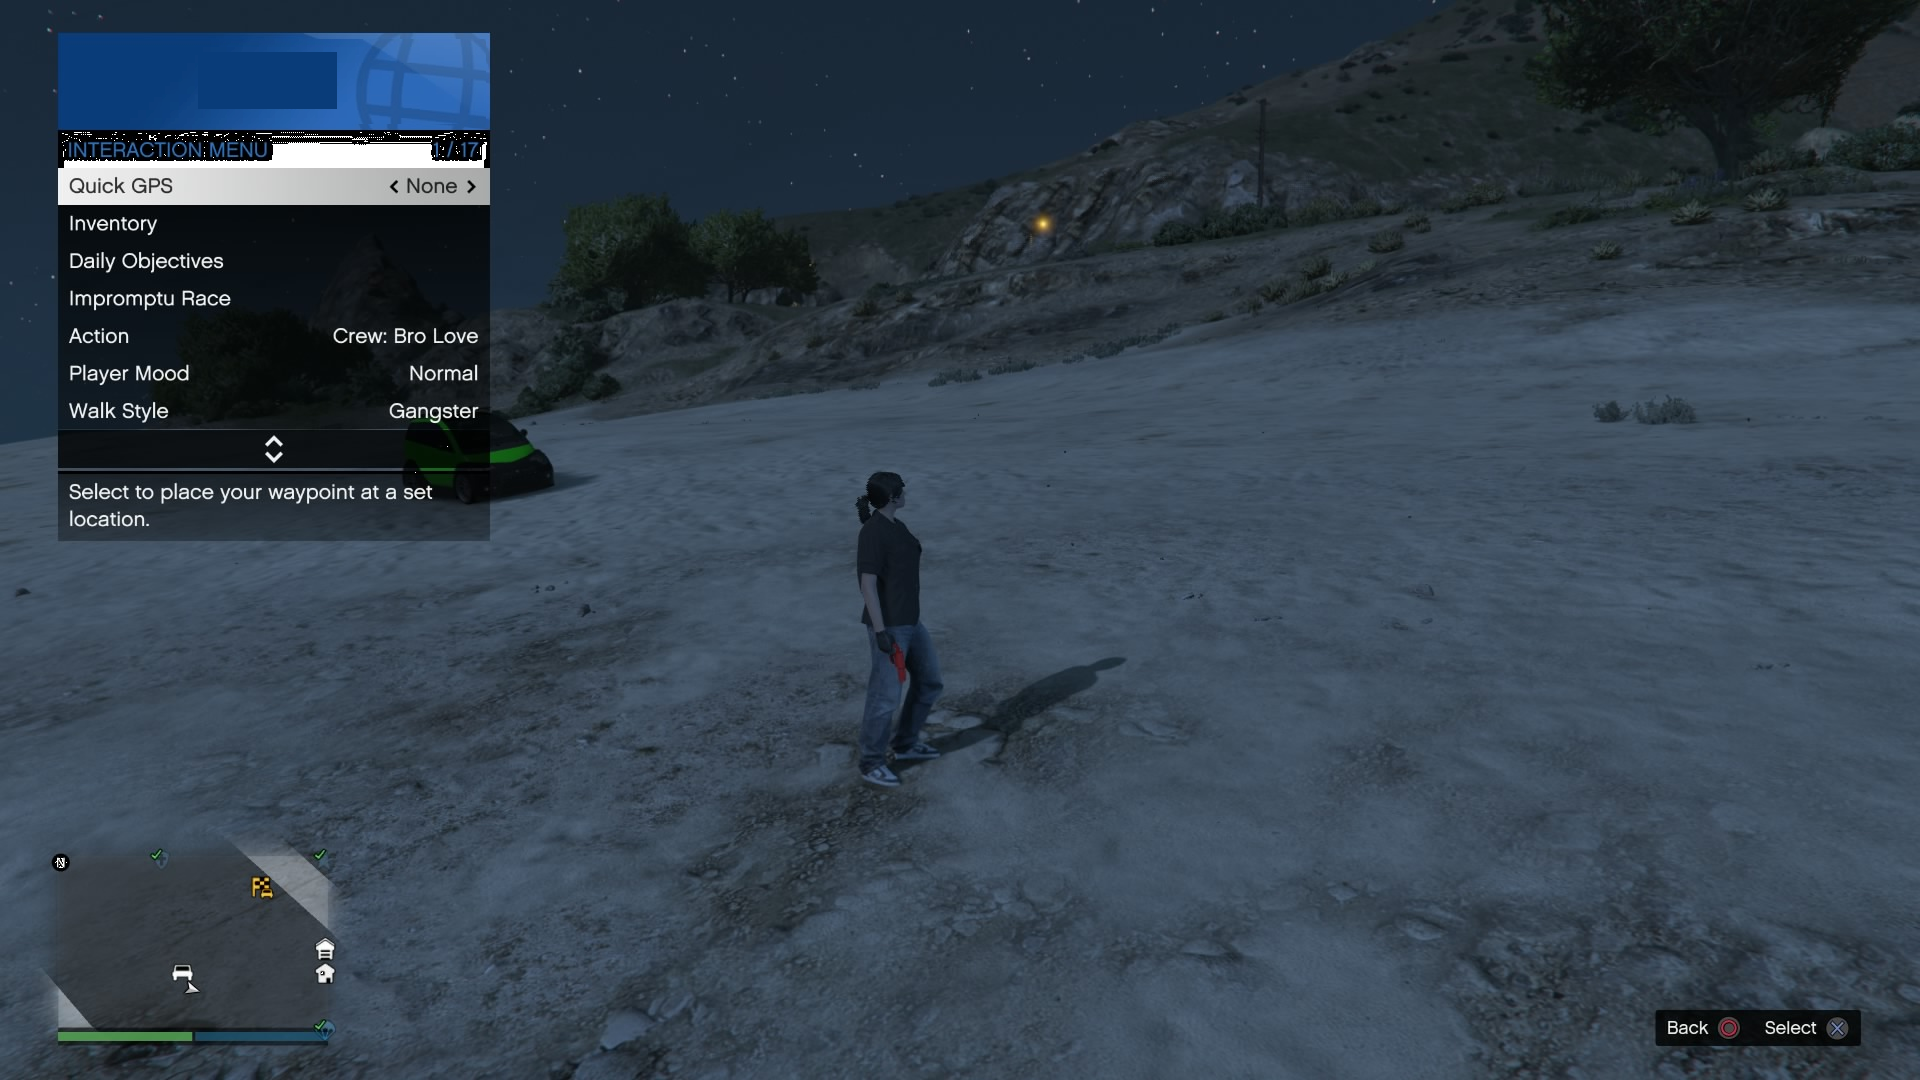 Gta 5 how chat witch crew